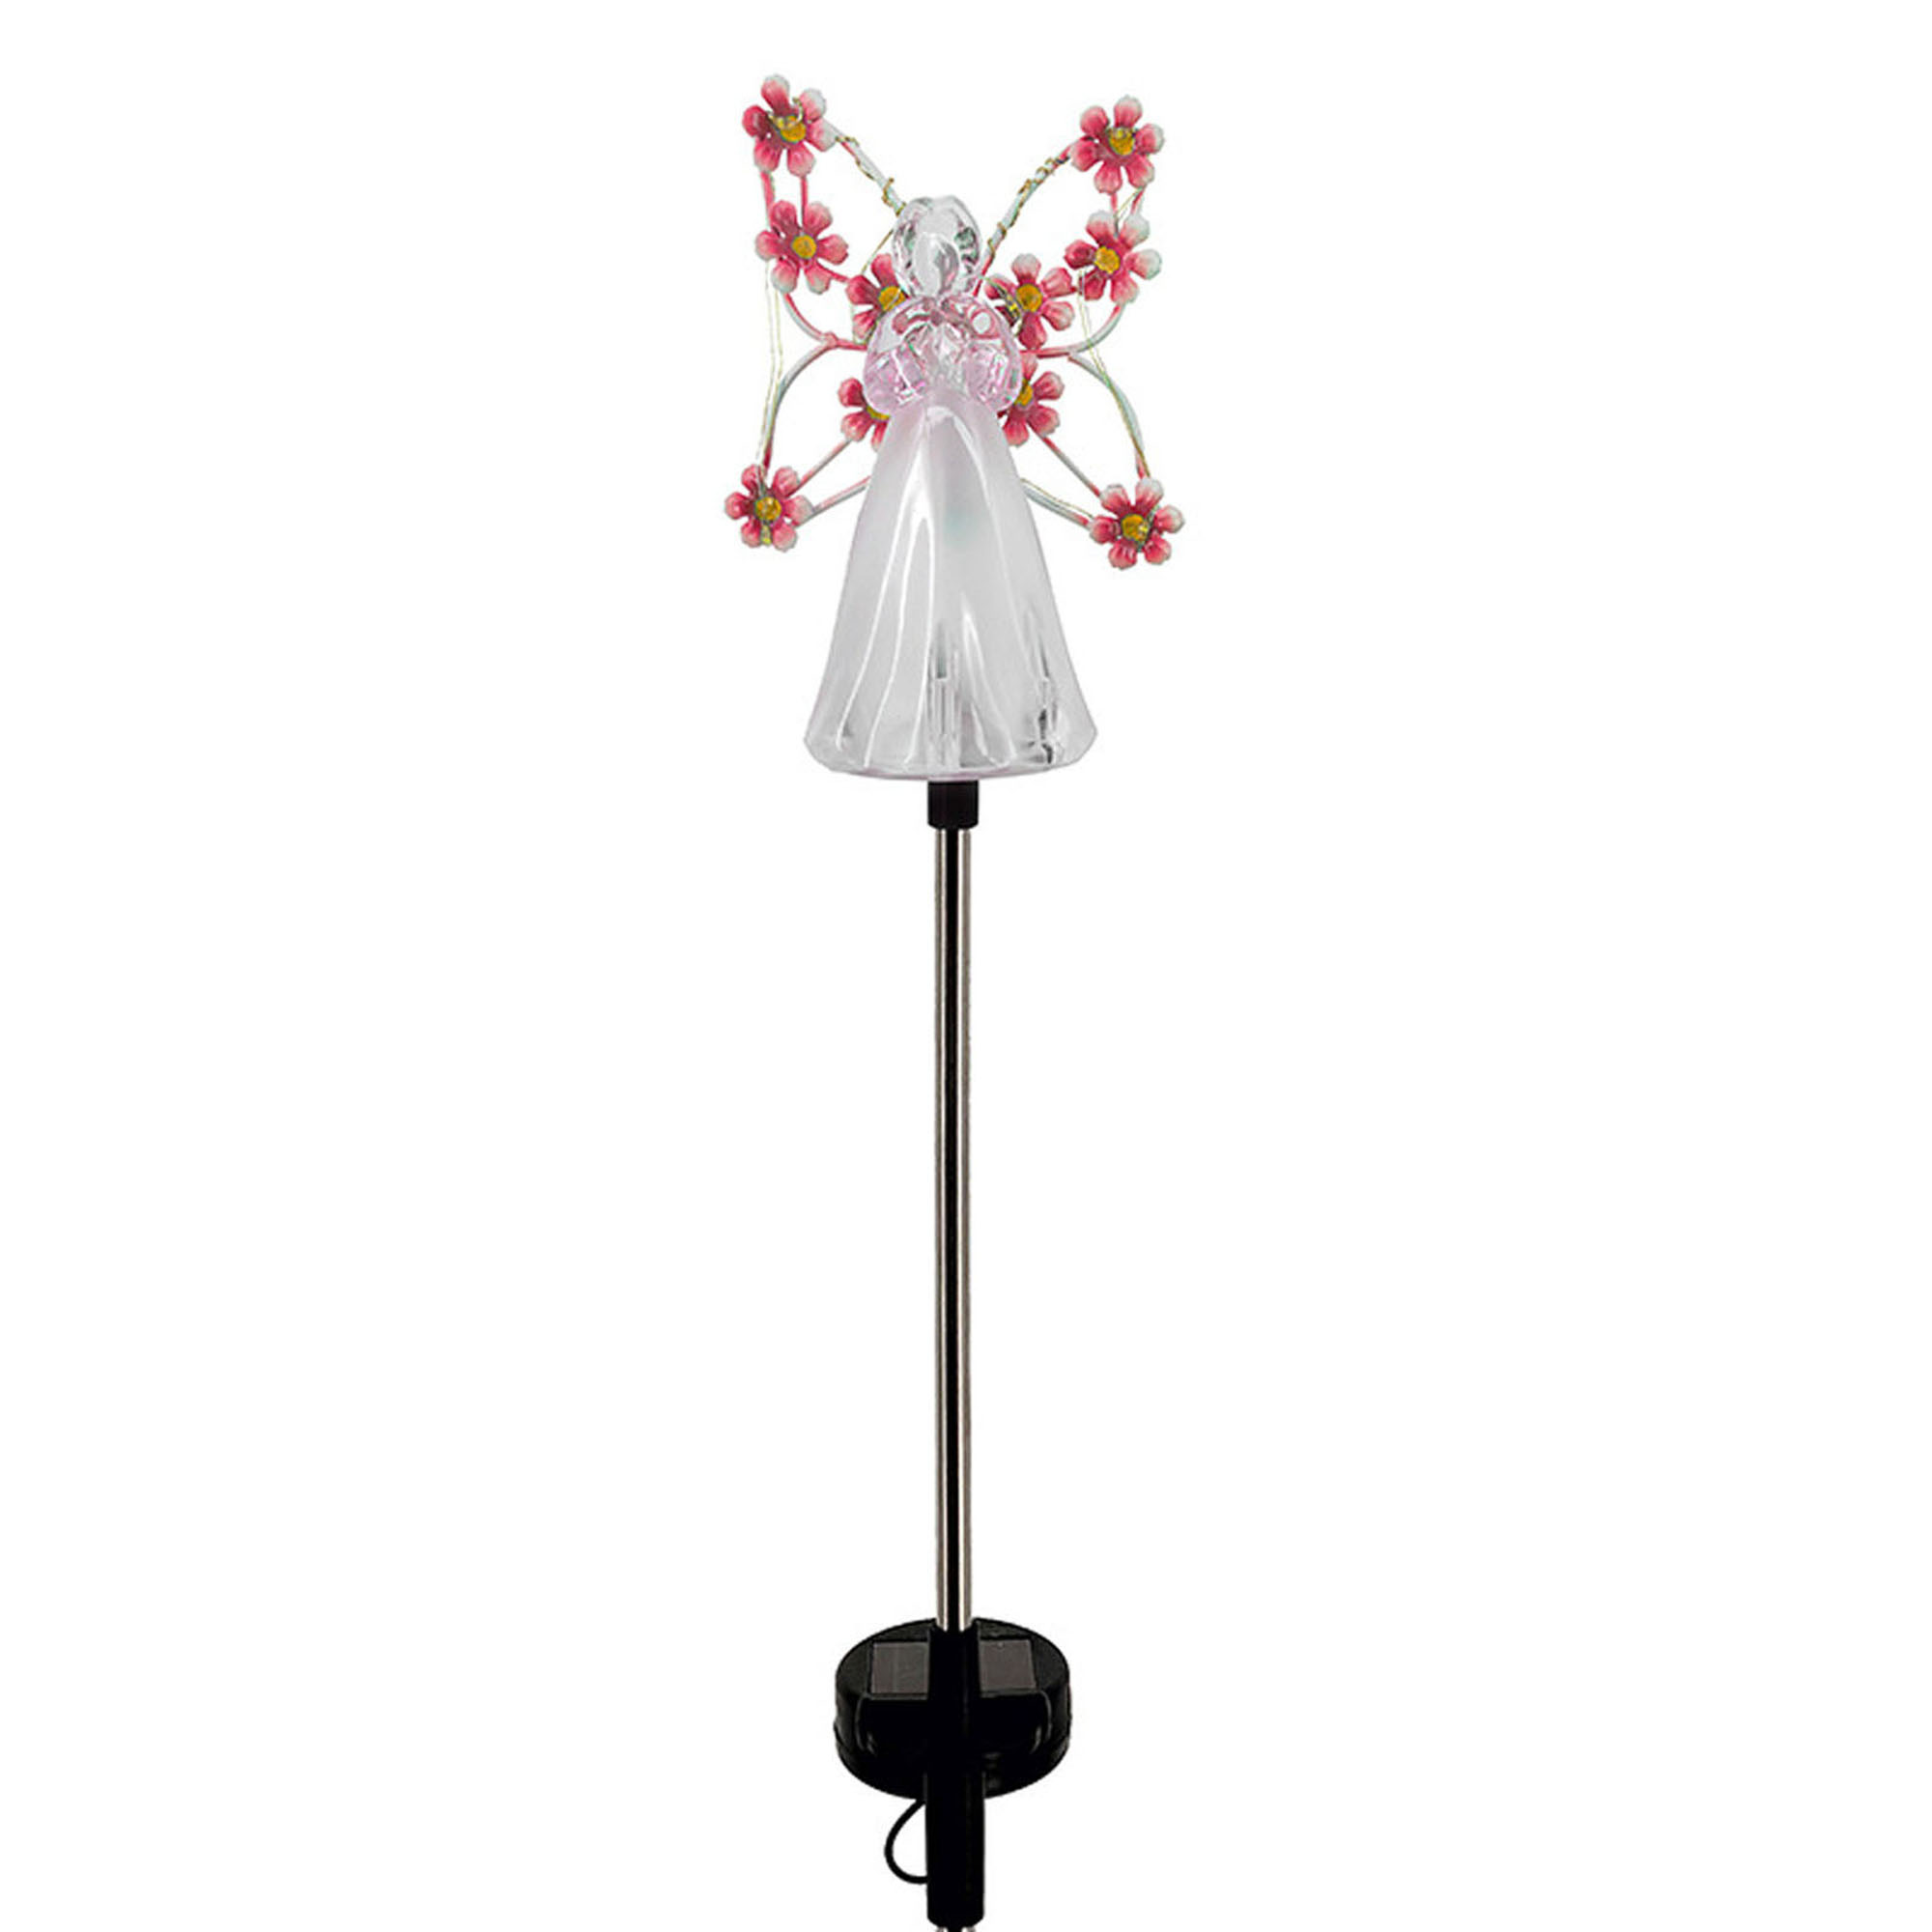 Solar Angel Garden Stake Lights, Angel lamp Solar Lawn Light Angel Solar Lawn Light Mothers Day Garden Gifts Garden Angel Grave Markers for Cemetery Garden Decoration Solar Angel Light Yellow - image 1 of 3